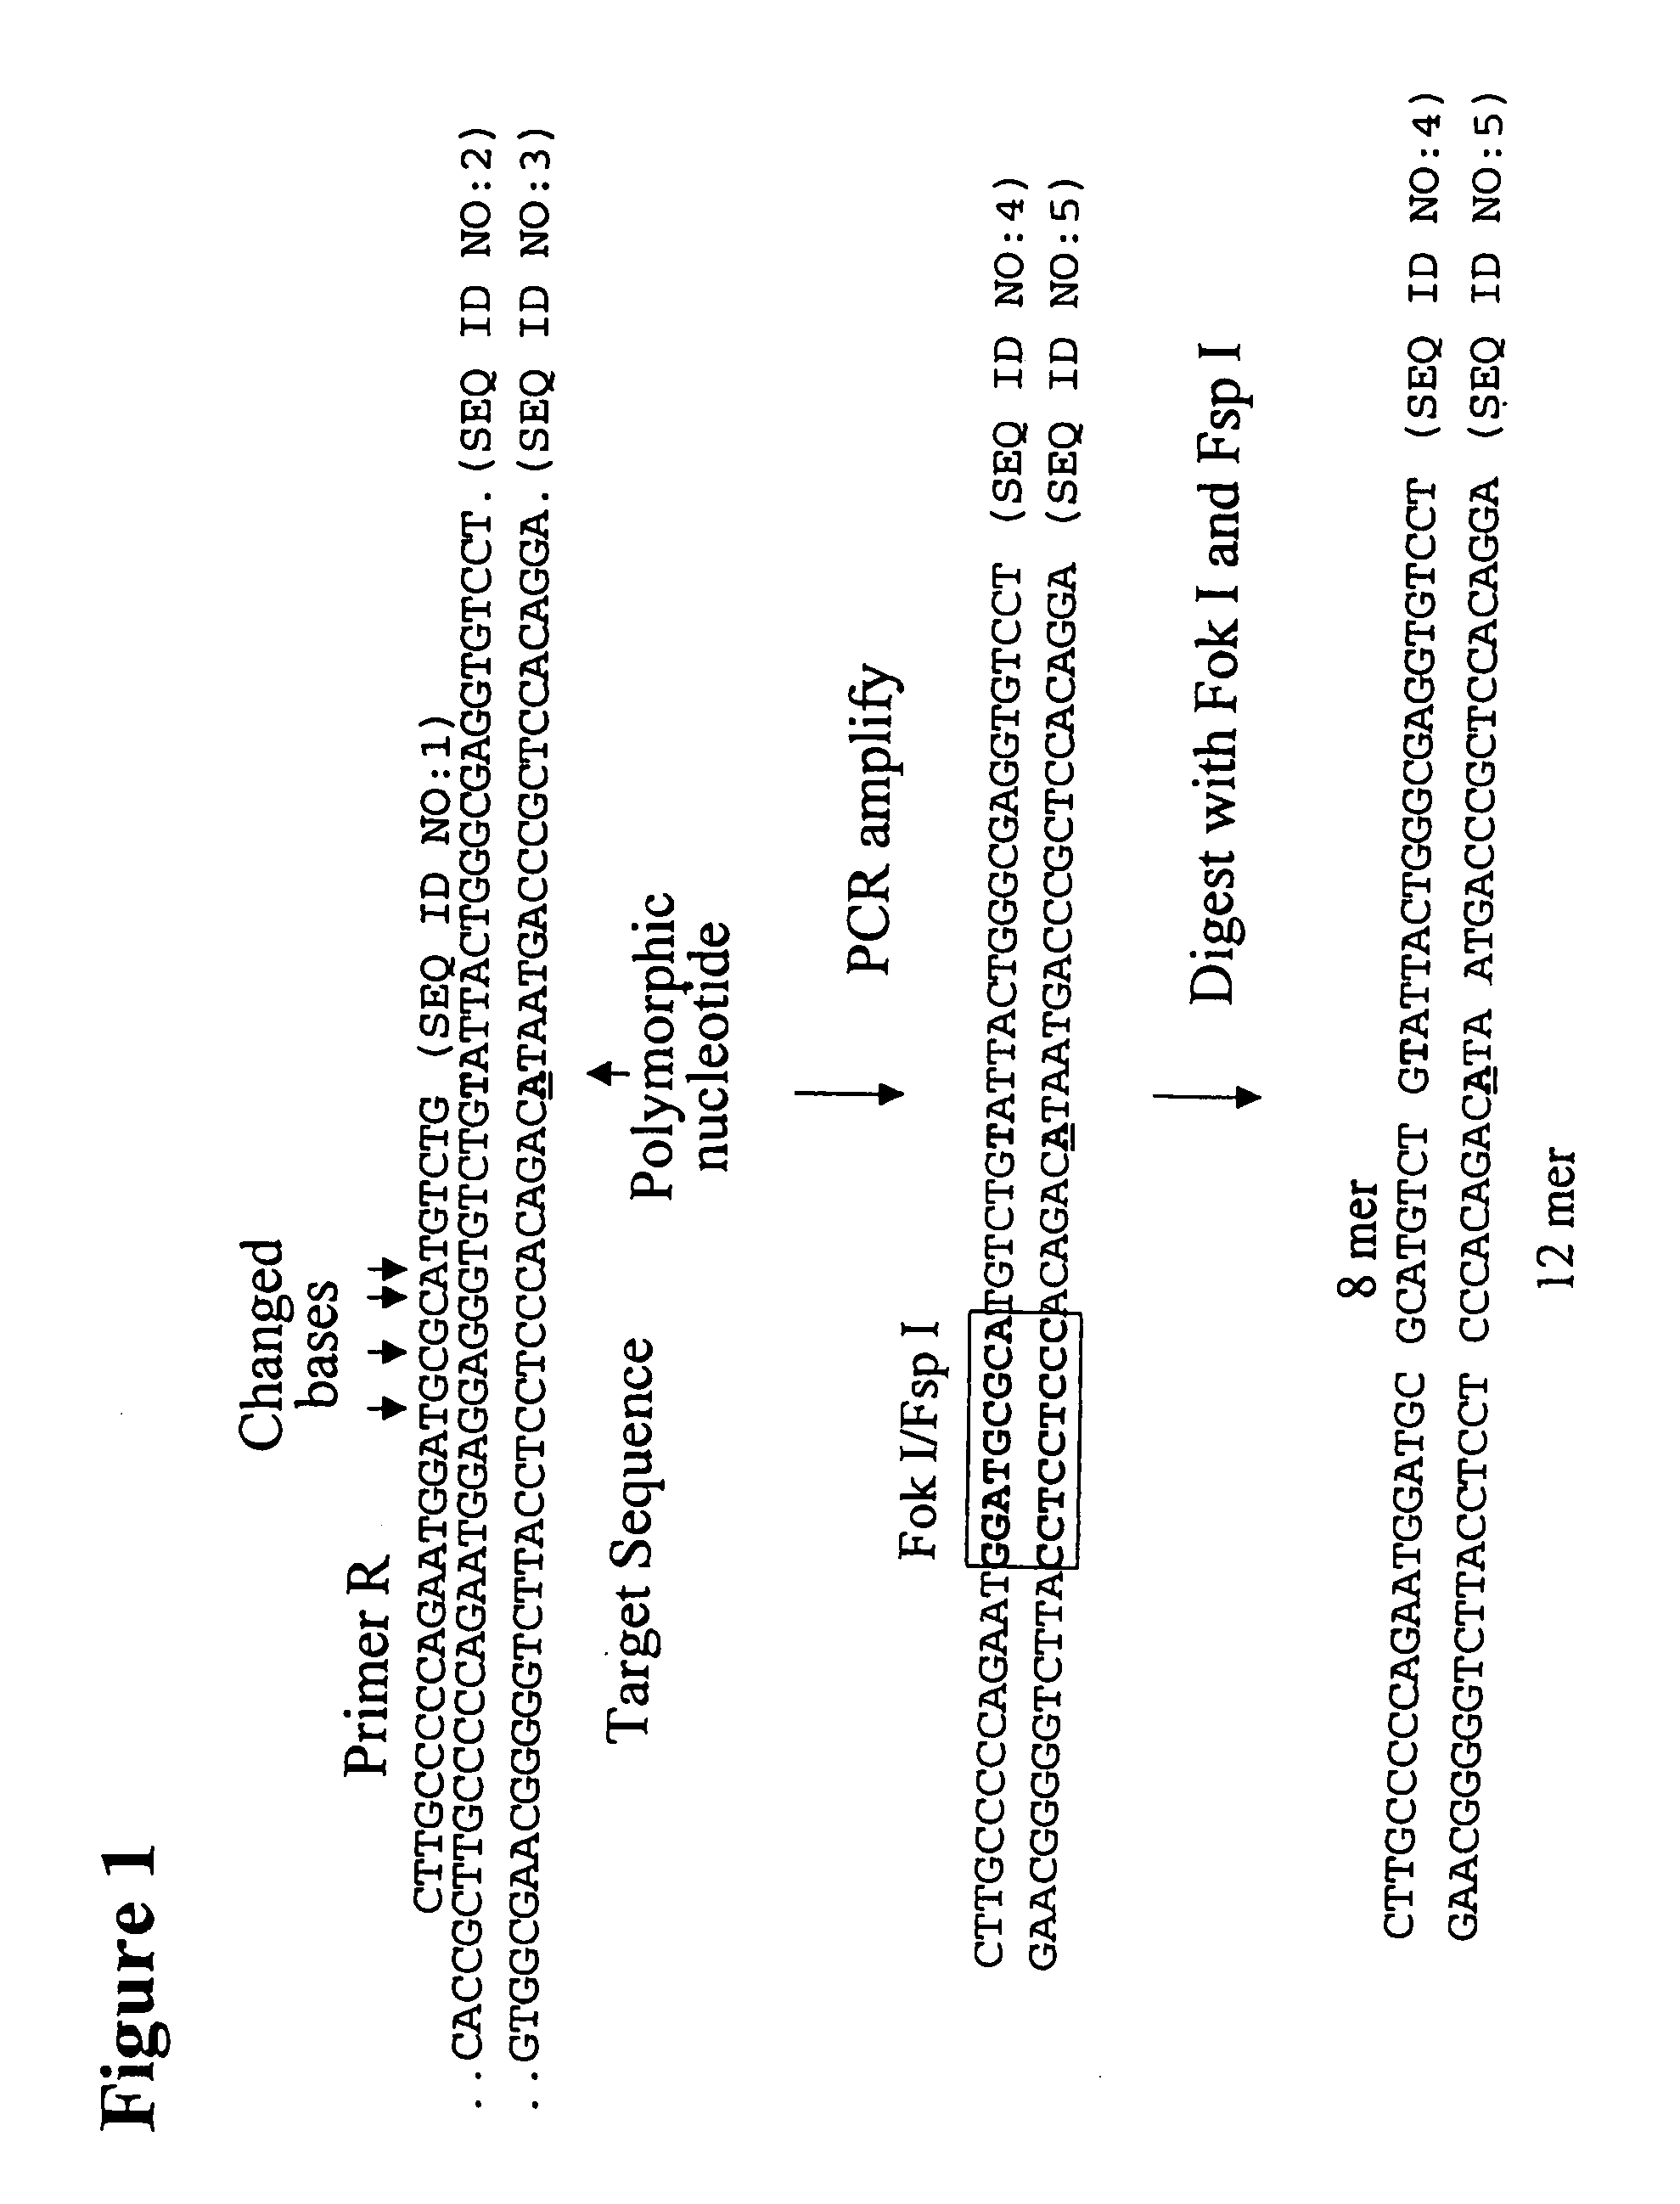 Methods for genetic analysis of DNA to detect sequence variances